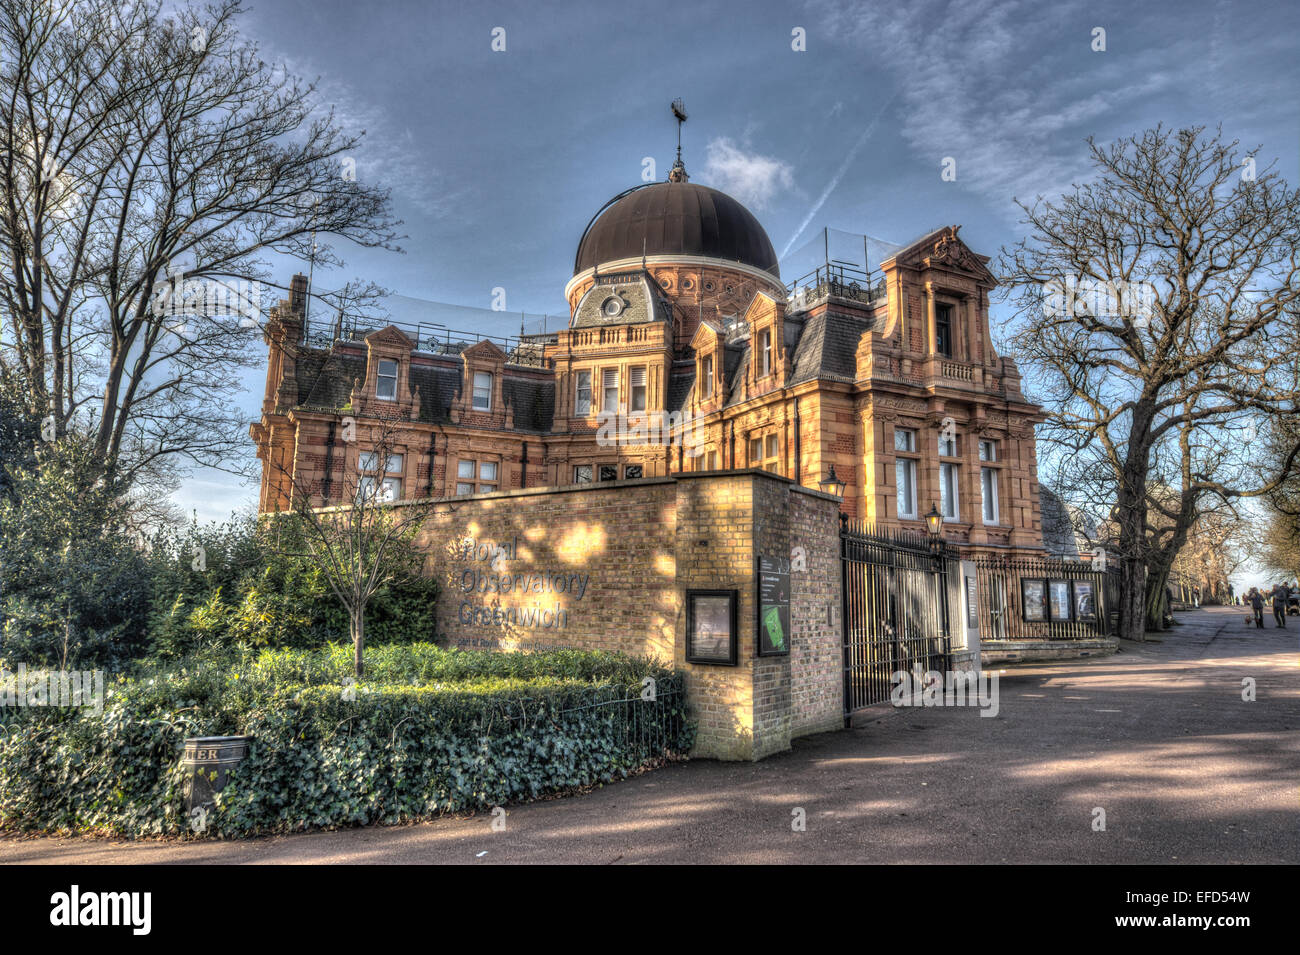 Le Royal Observatory Greenwich Banque D'Images